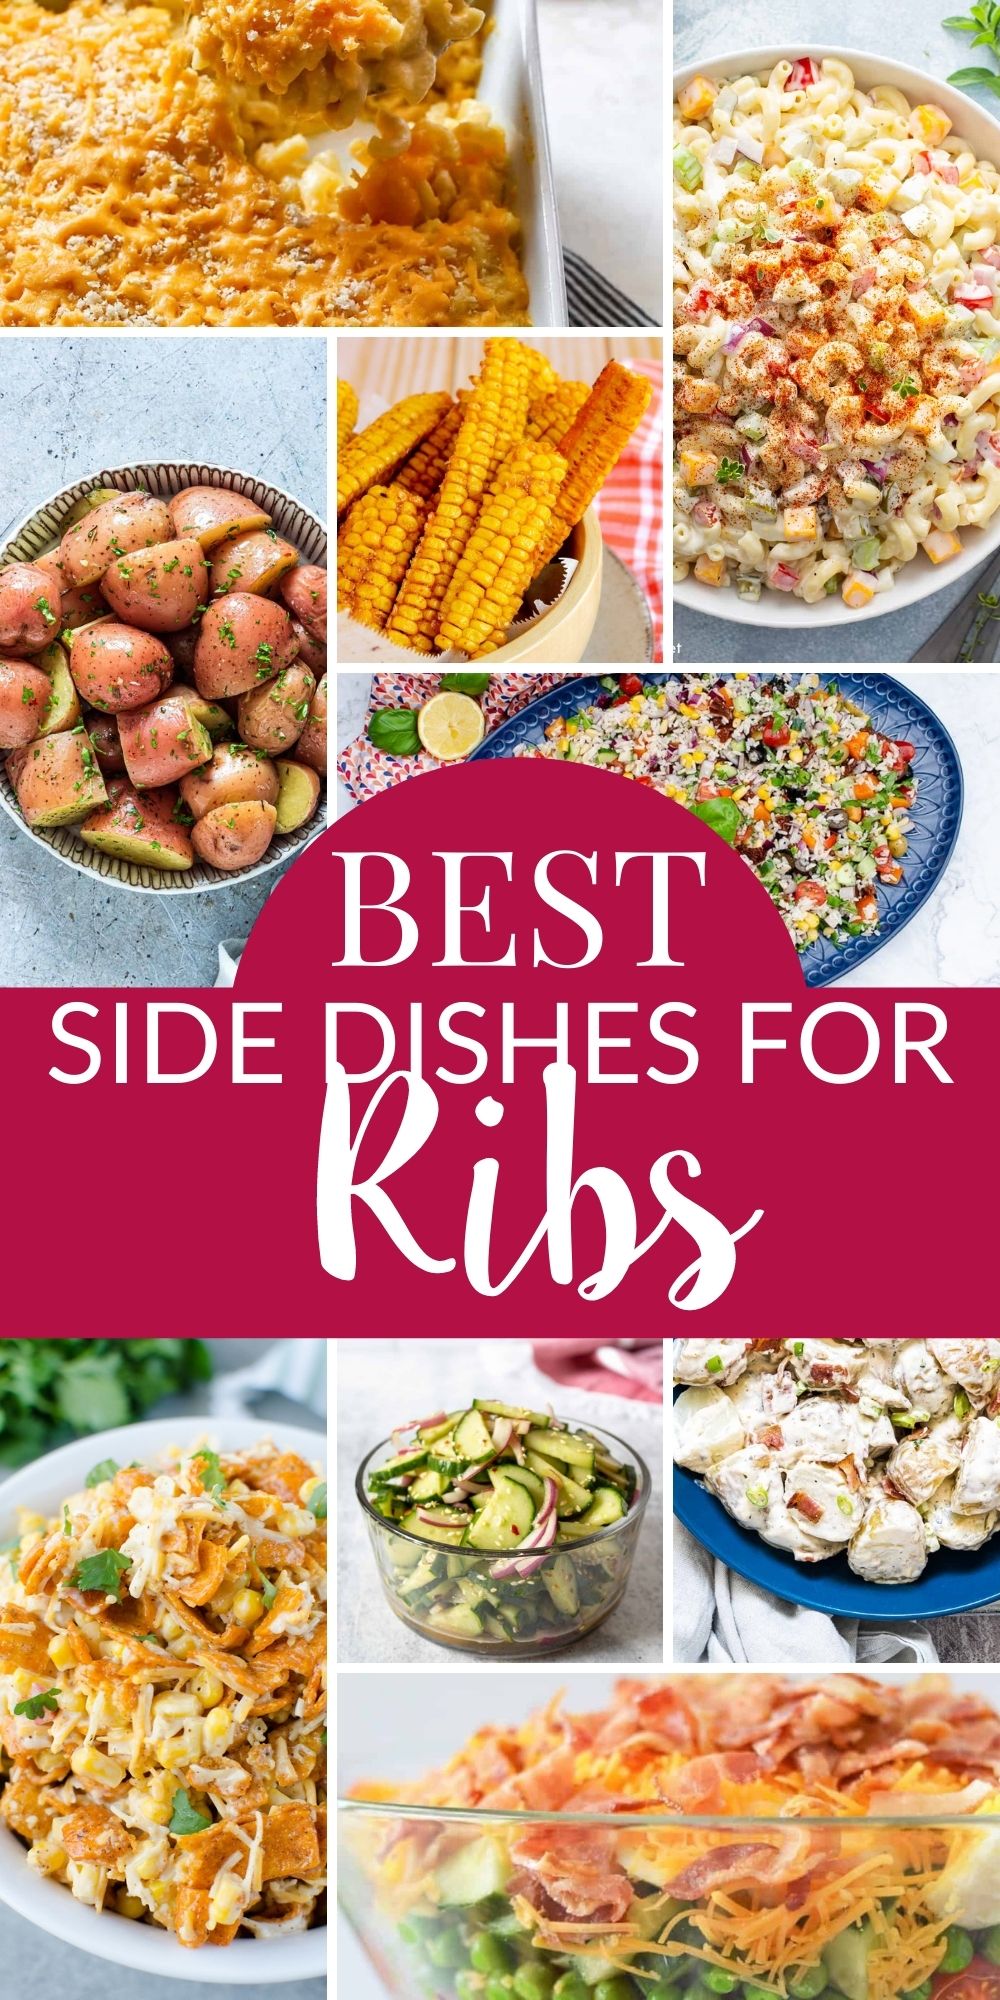 The Best Sides for Ribs